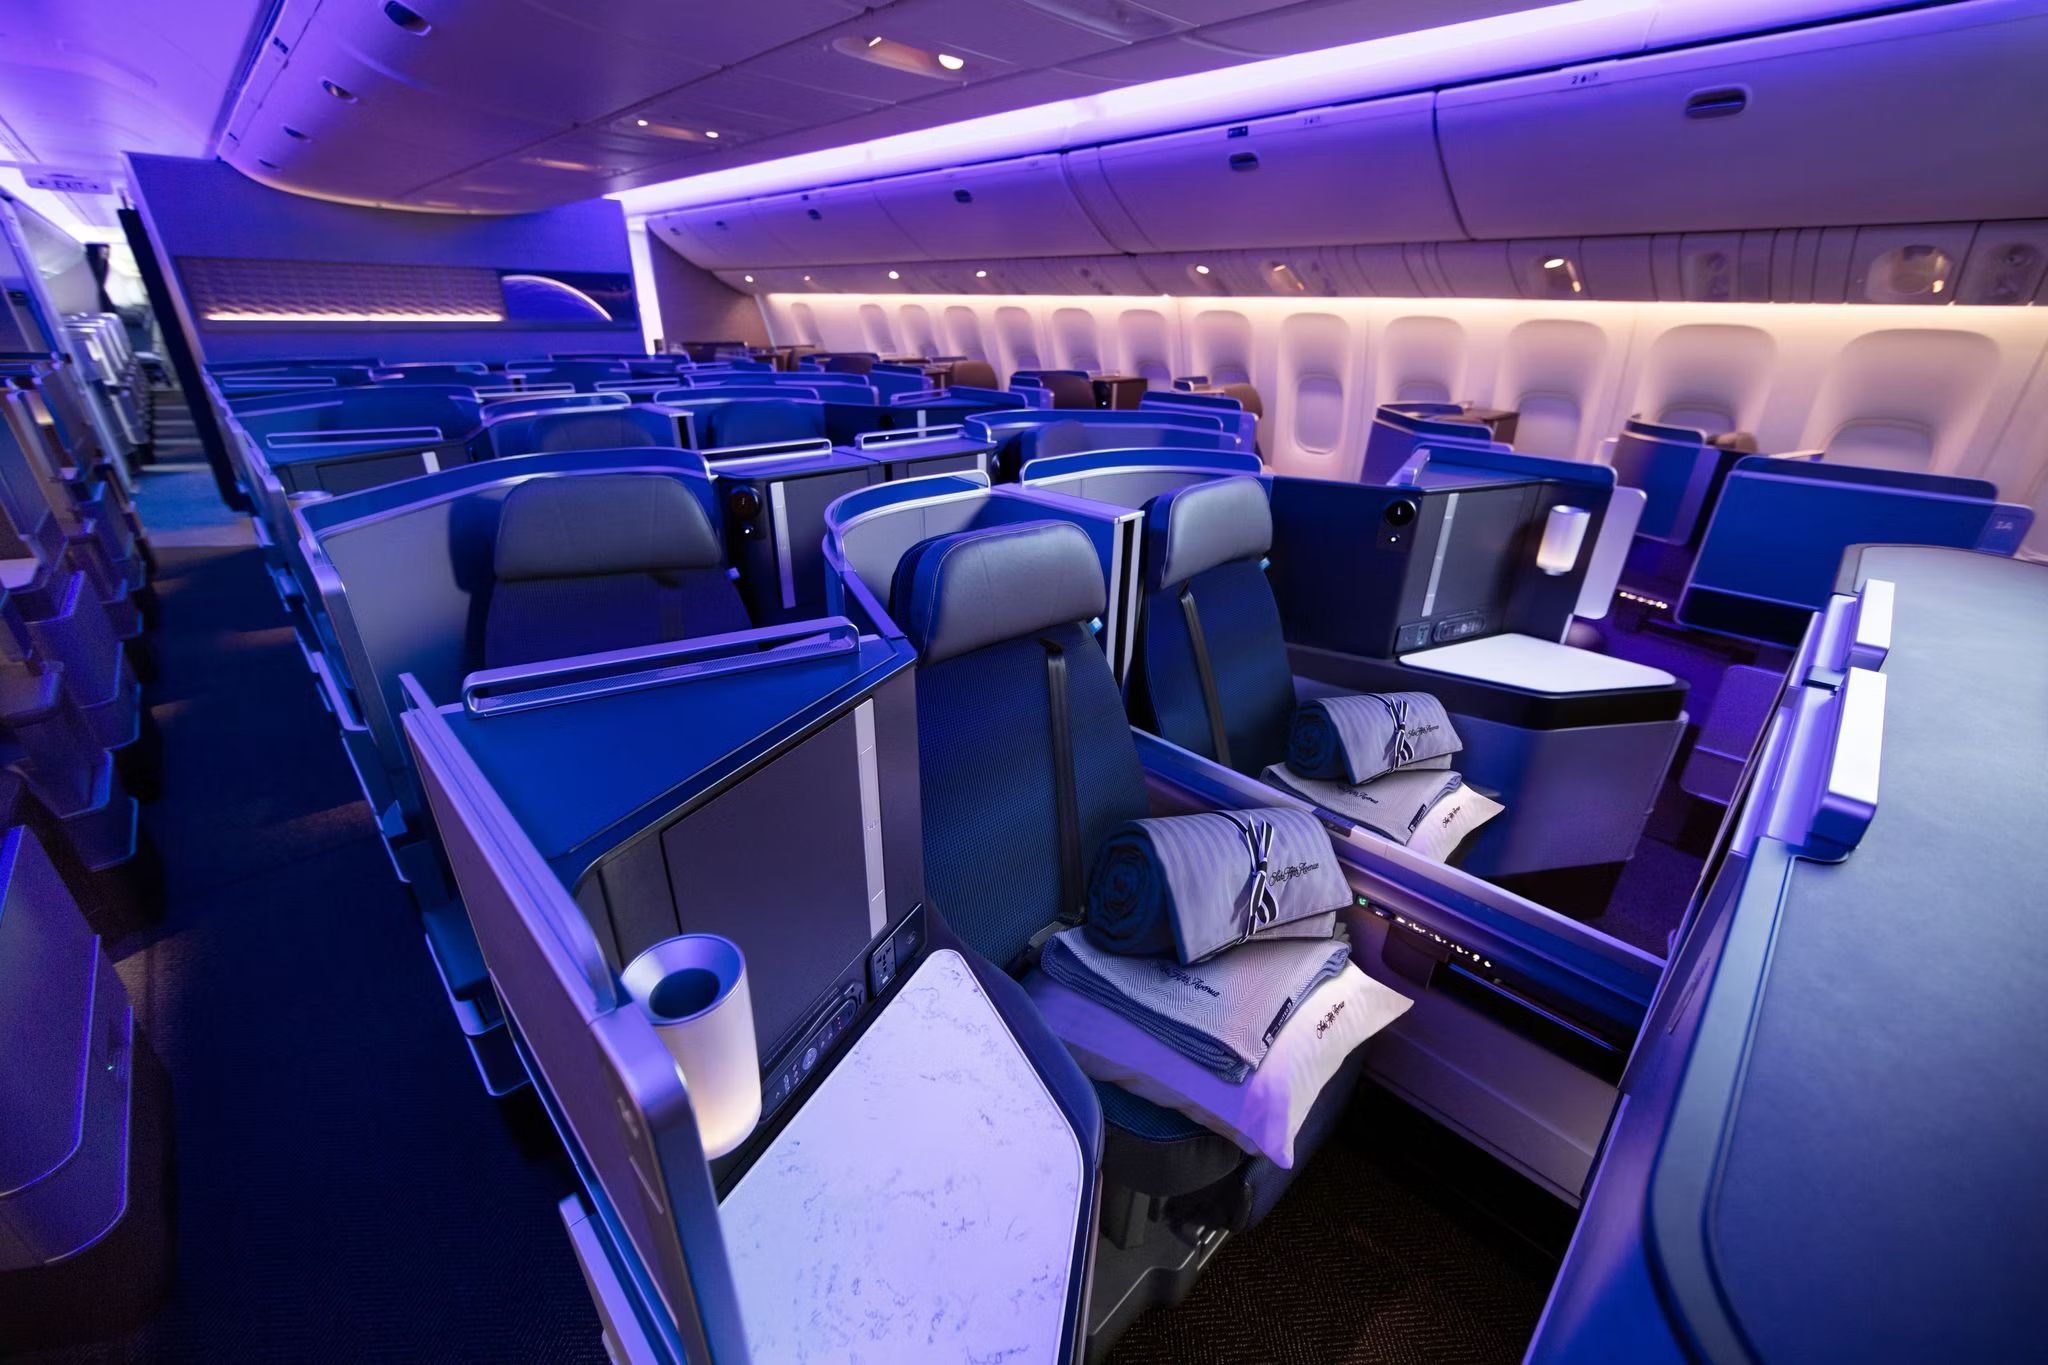 An overview of the United Airlines Polaris Business Class cabin.